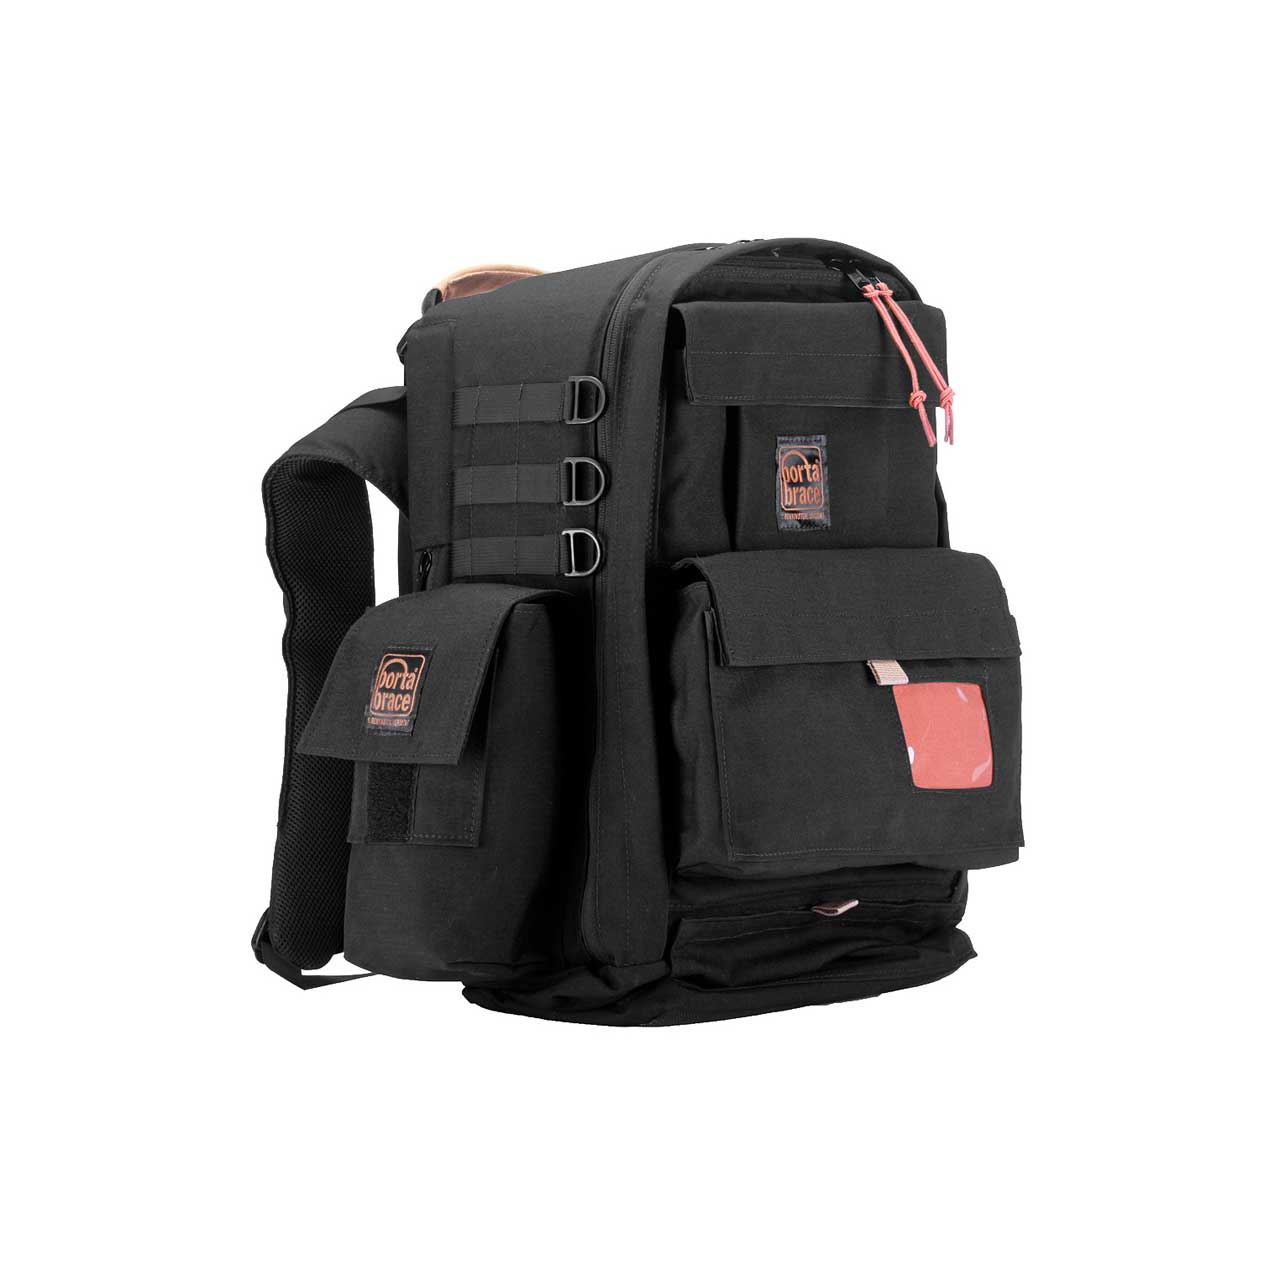 Portabrace RIG-3BKXSRK RIG Carrying Backpack with Interior Accessories ...